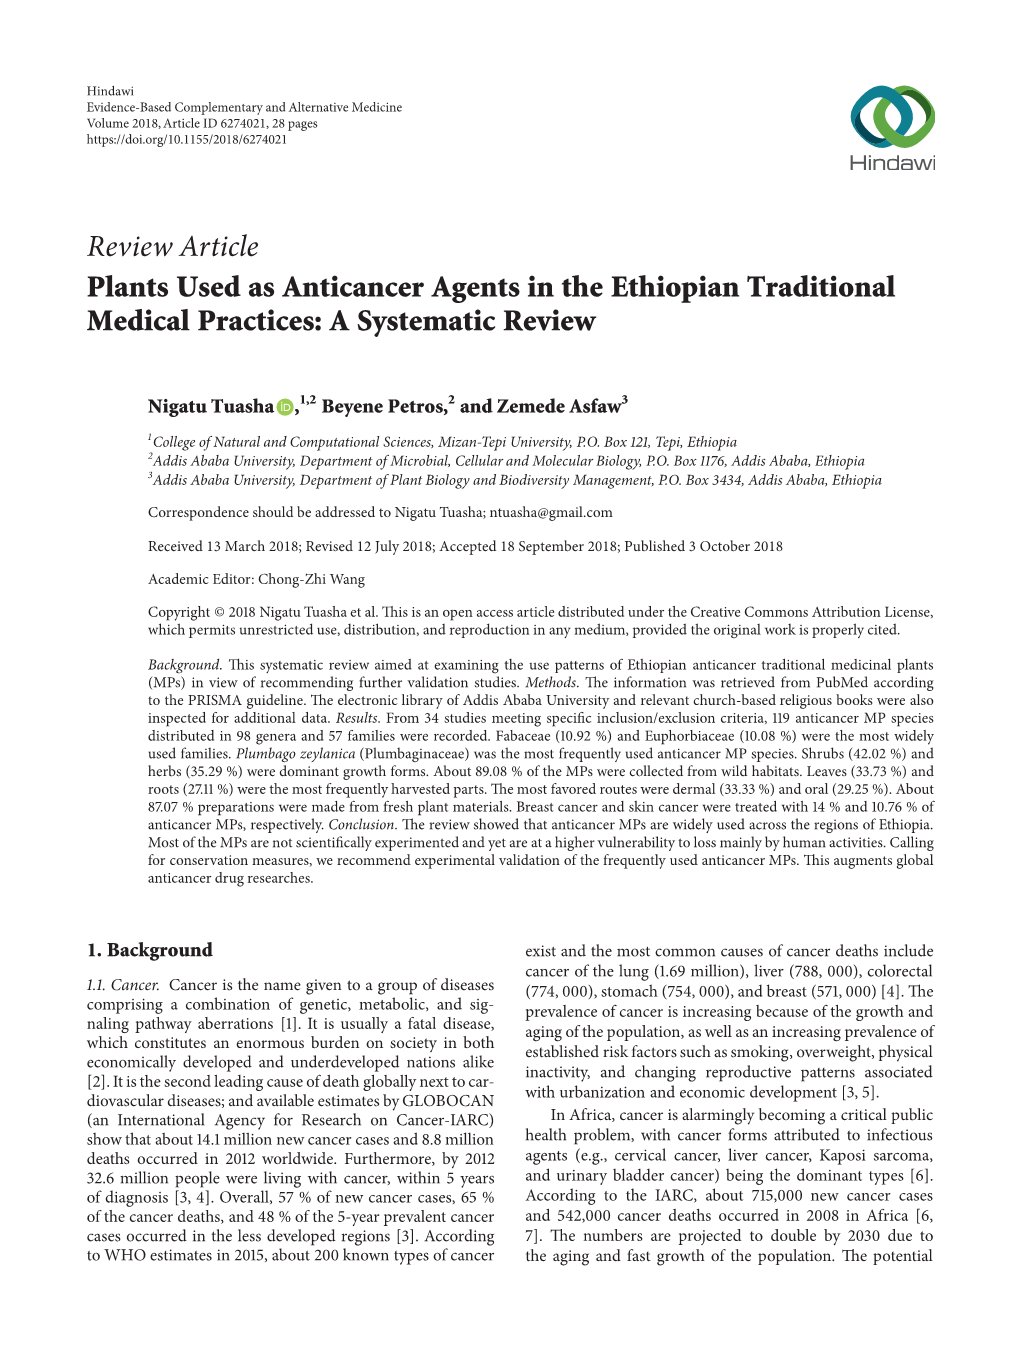 Plants Used As Anticancer Agents in the Ethiopian Traditional Medical Practices: a Systematic Review